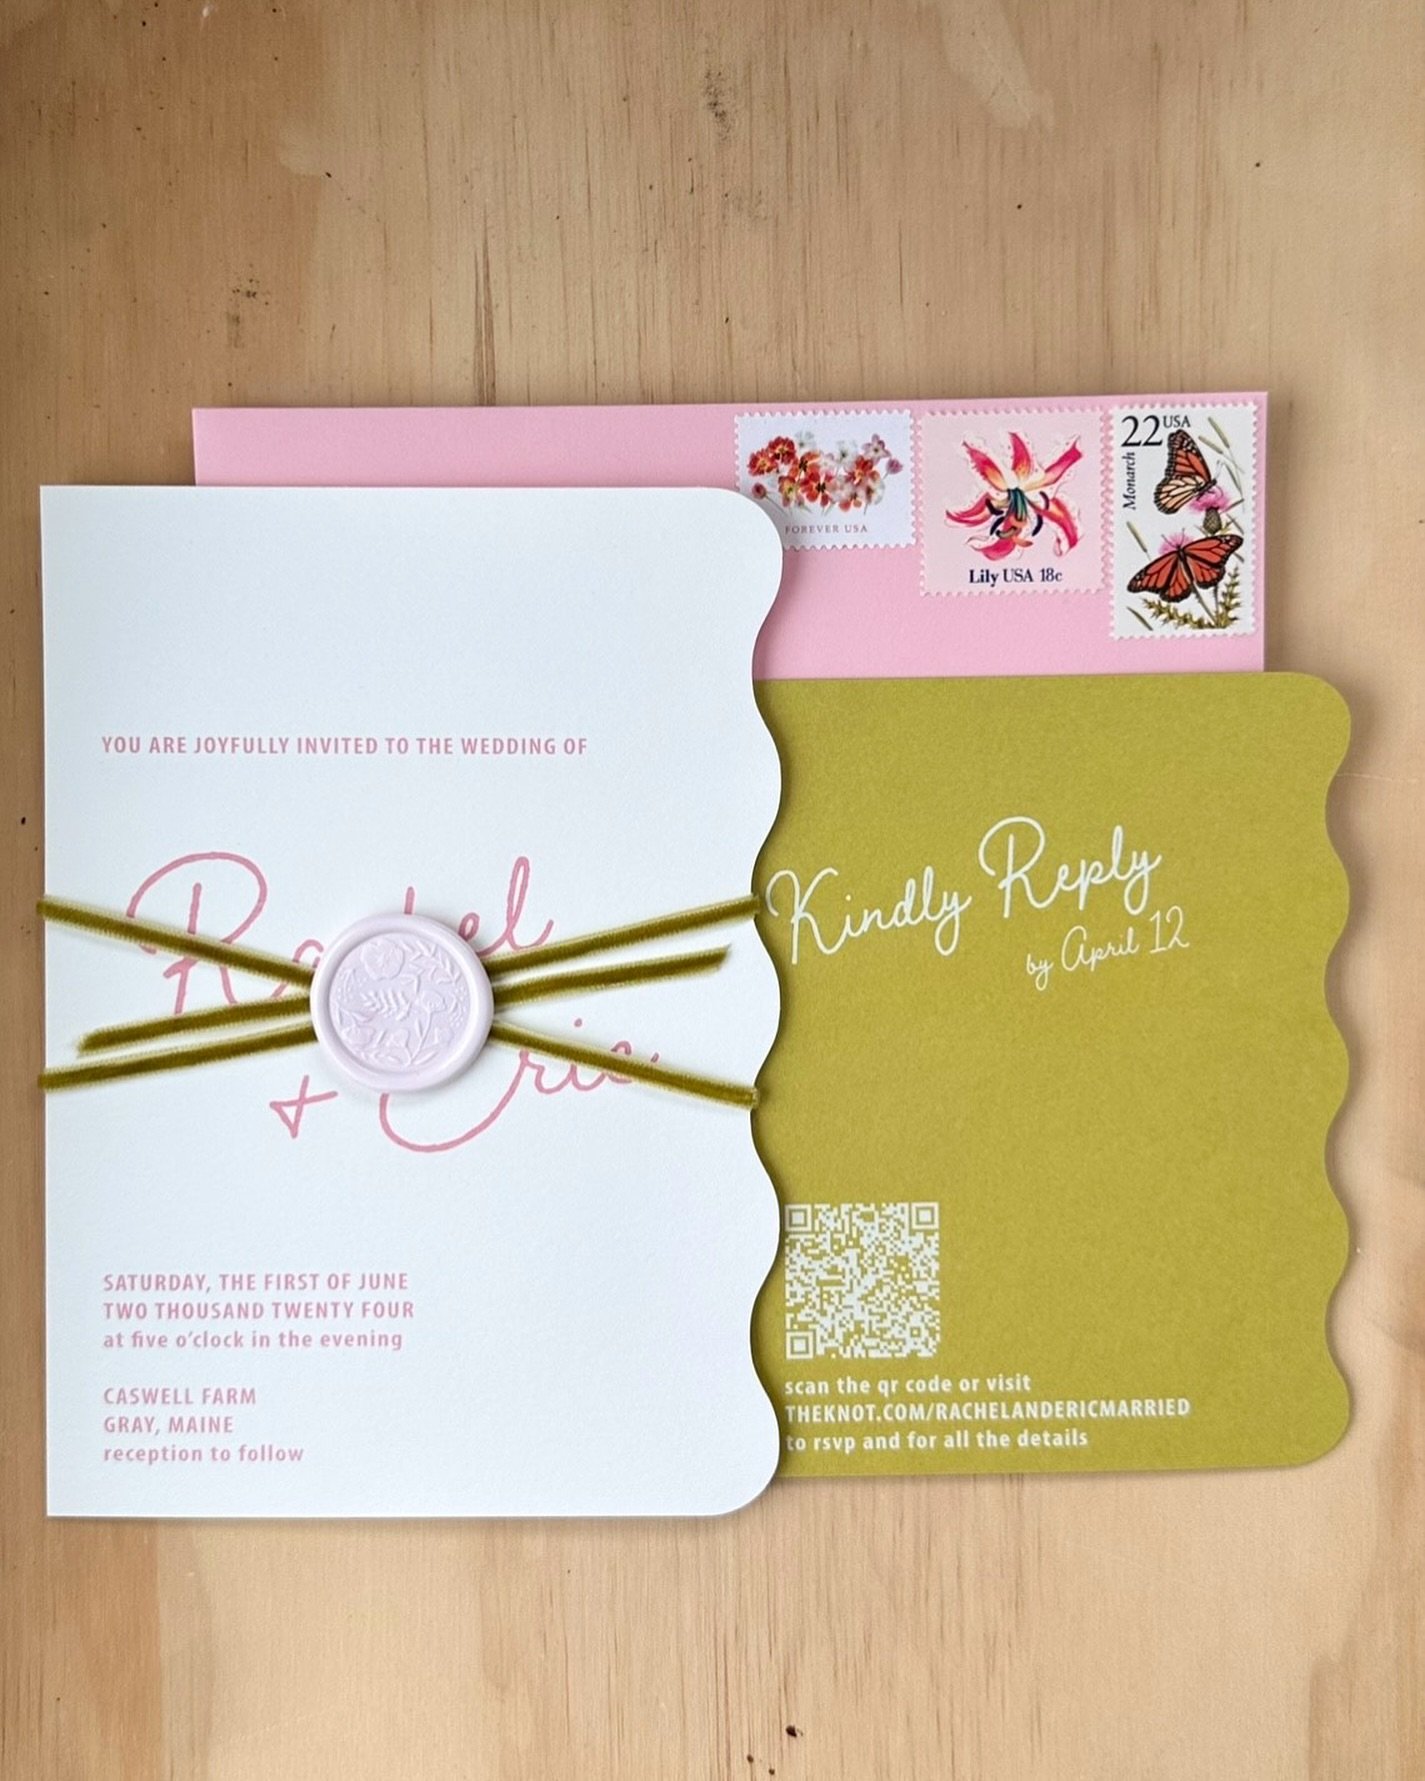 in one month we celebrate rachel + eric at @caswellfarmmaine. these two are not only super sweet but very creative, a fierce combo. in fact, as a designer, rachel designed, assembled, and wax sealed these delightful these invitations herself- (passss